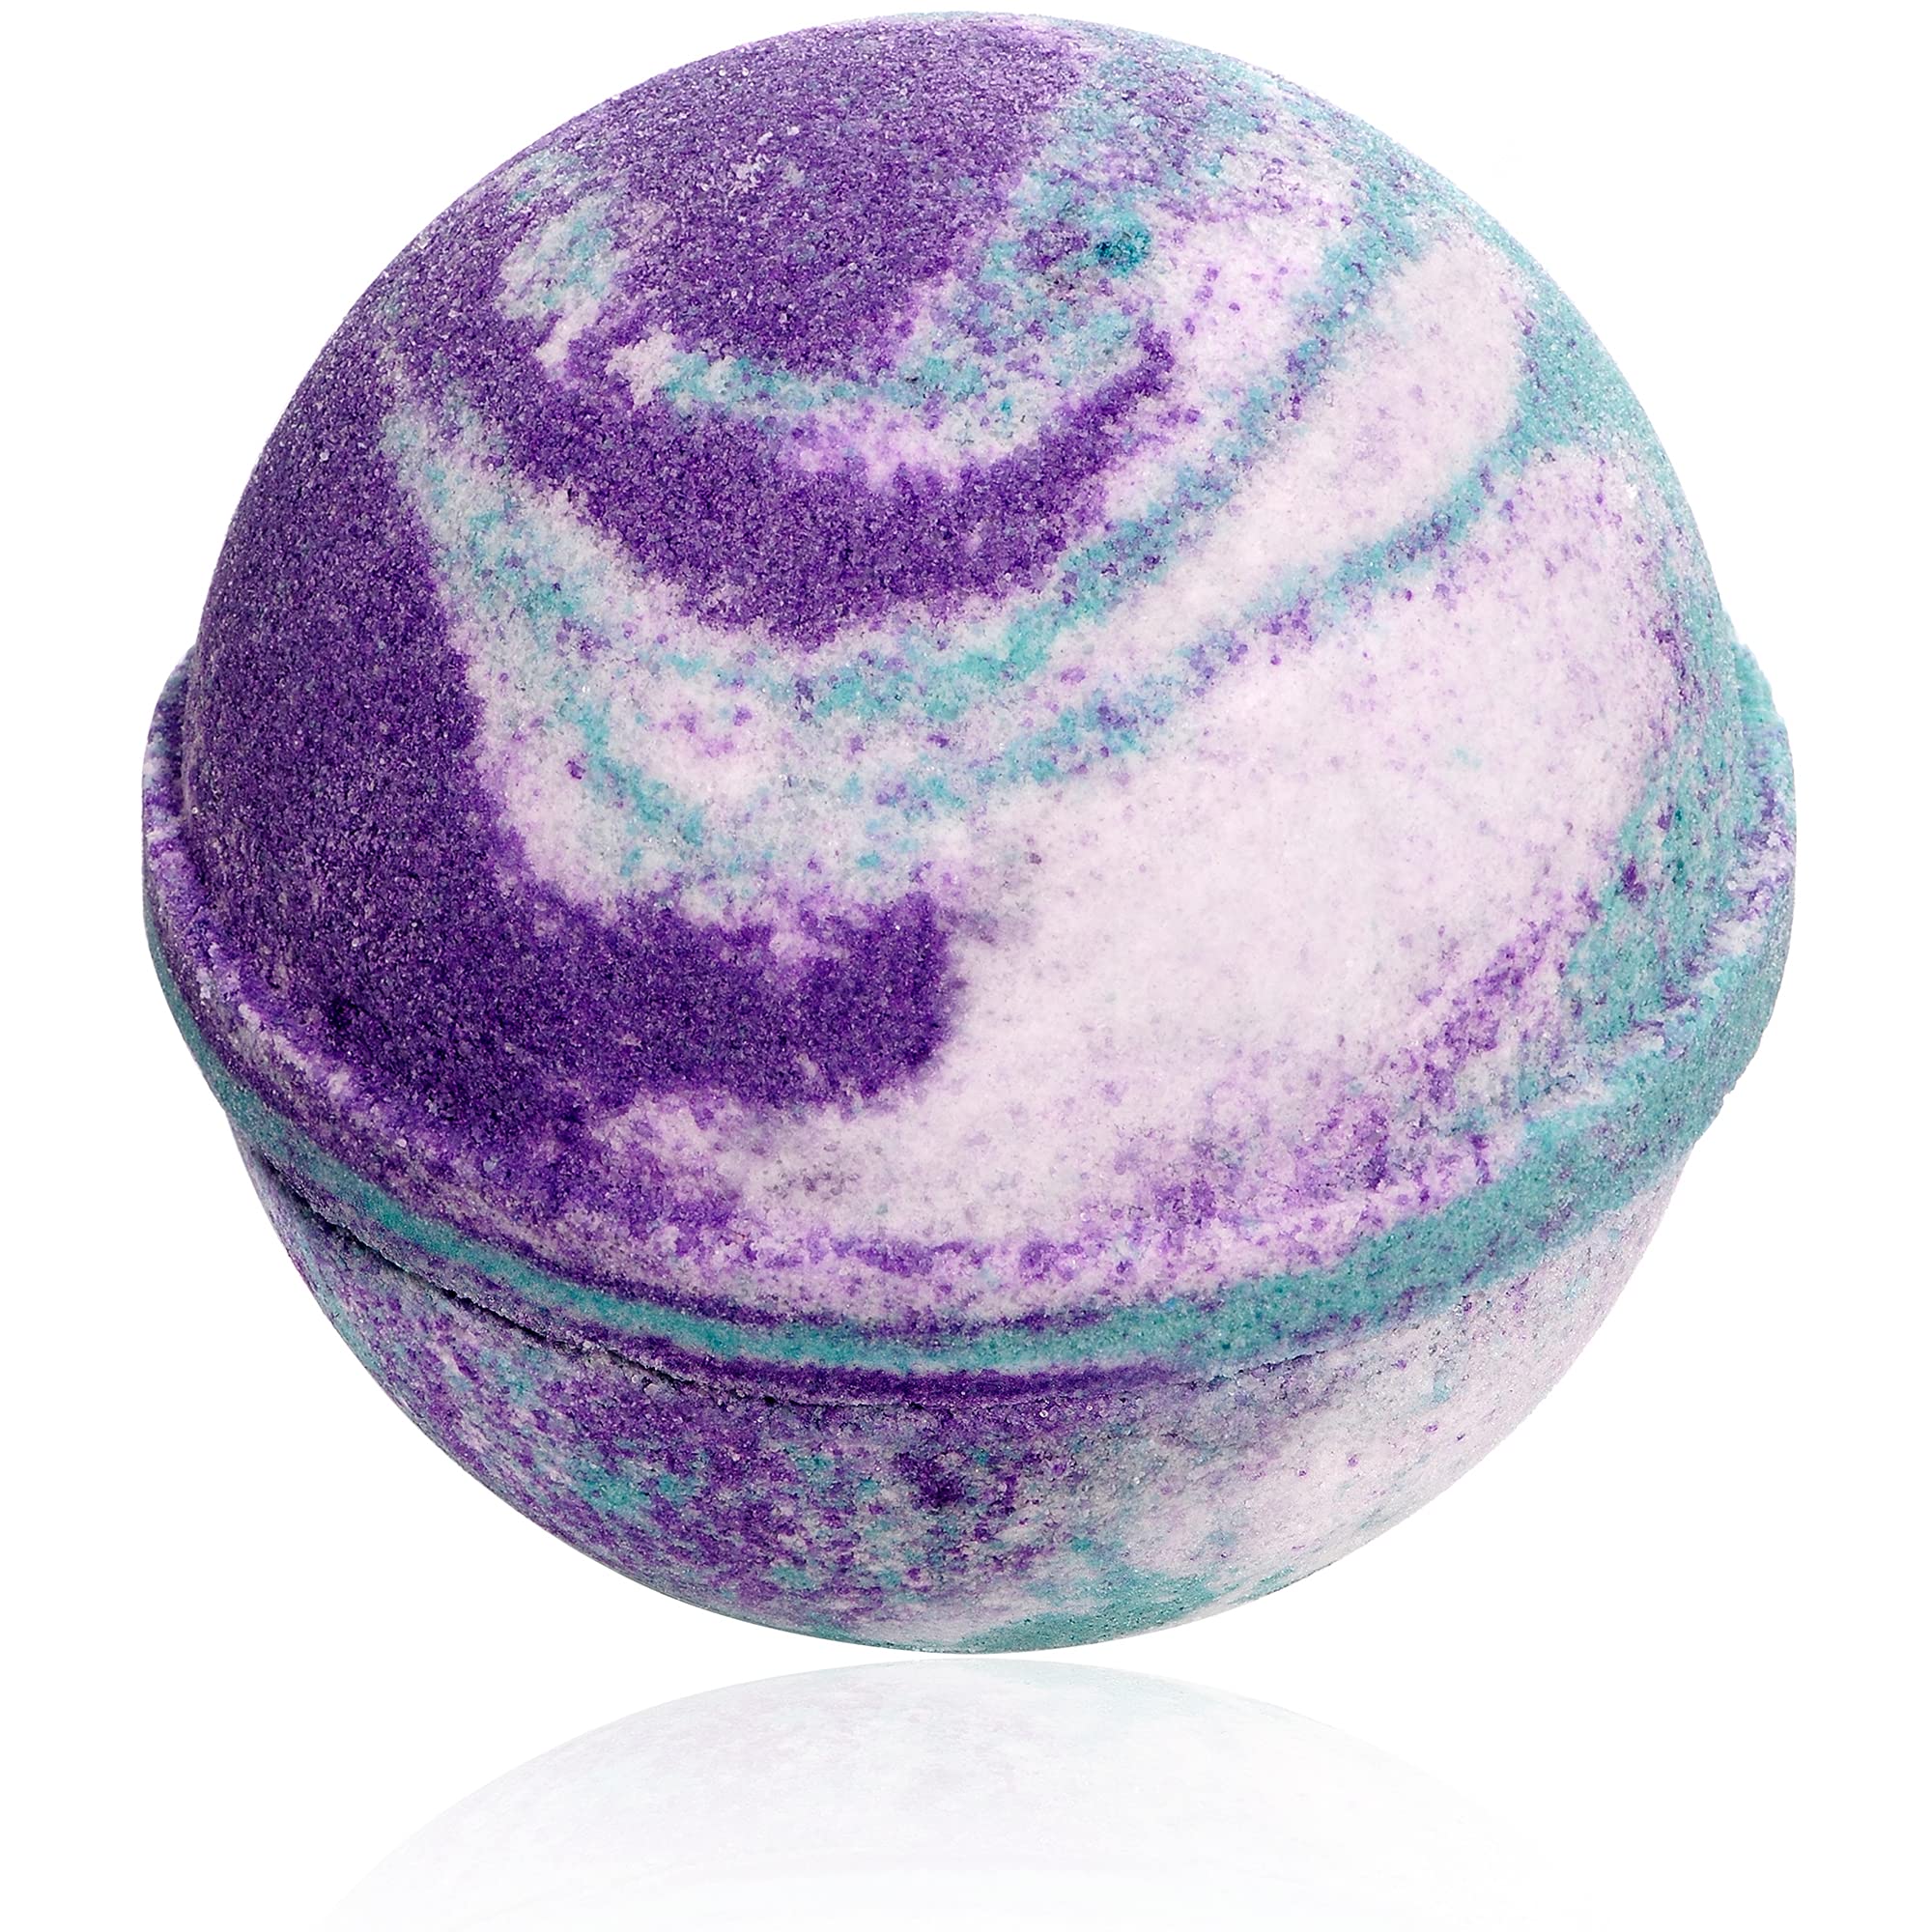 Bath Bomb with Ring Inside Mermaid Daydream Extra Large 10 oz. Made in USA (Surprise)